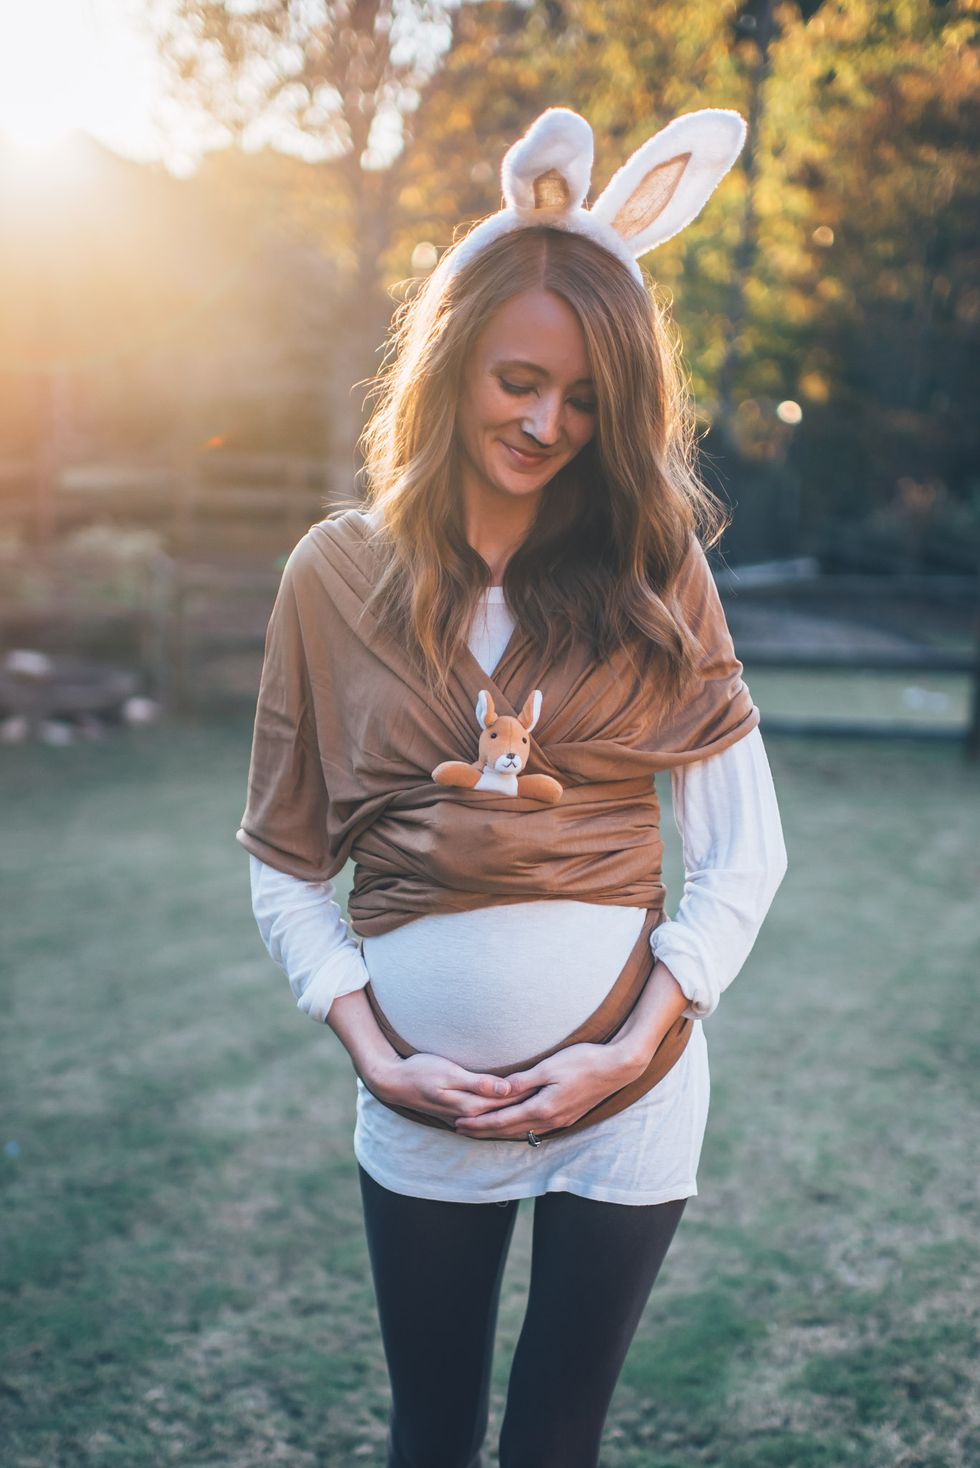 19 Adorable Harry Potter-Themed Products For Pregnant Women